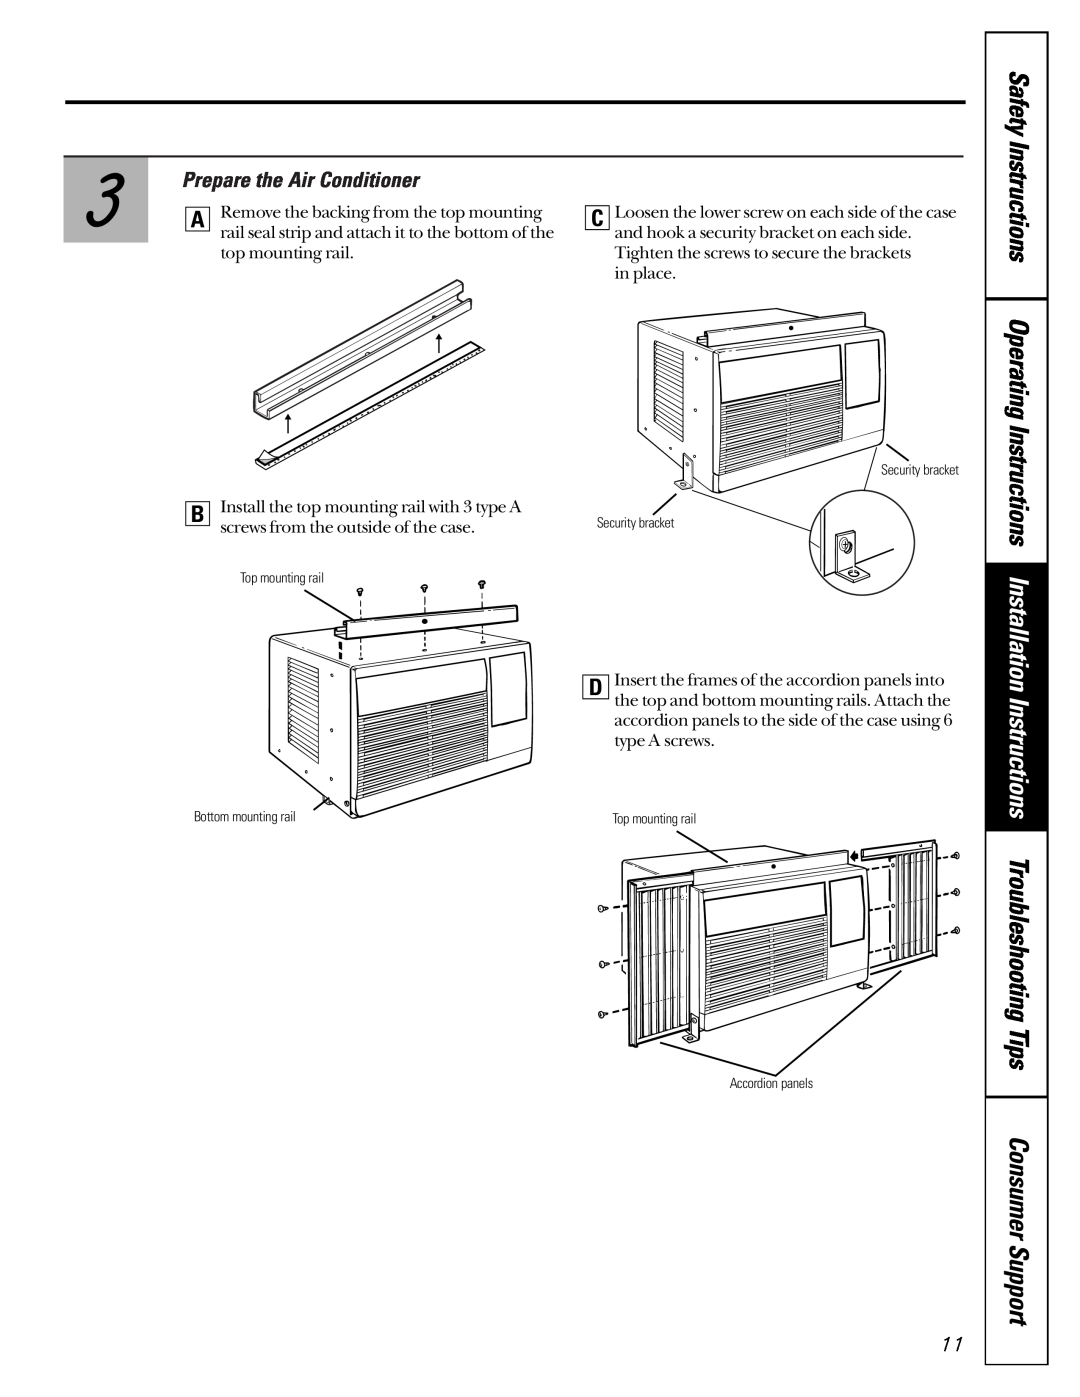 GE AST05, AST06, ASV05 installation instructions Safety Instructions Operating, Prepare the Air Conditioner 